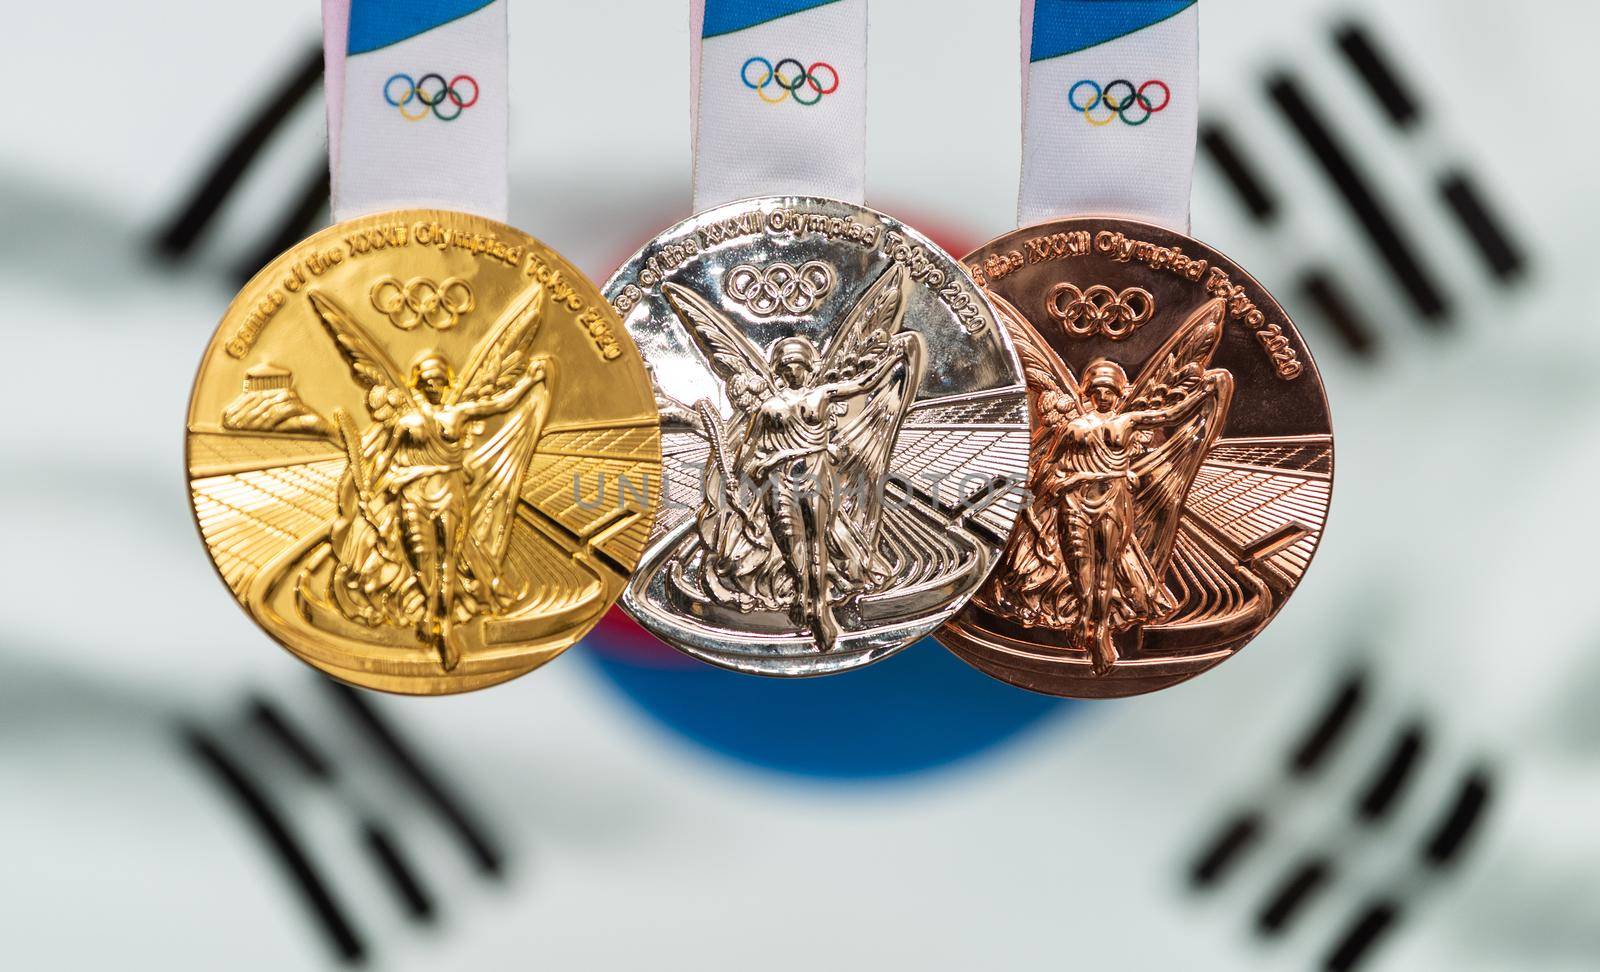 April 25, 2021 Tokyo, Japan. Gold, silver and bronze medals of the XXXII Summer Olympic Games 2020 in Tokyo on the background of the flag of South Korea.